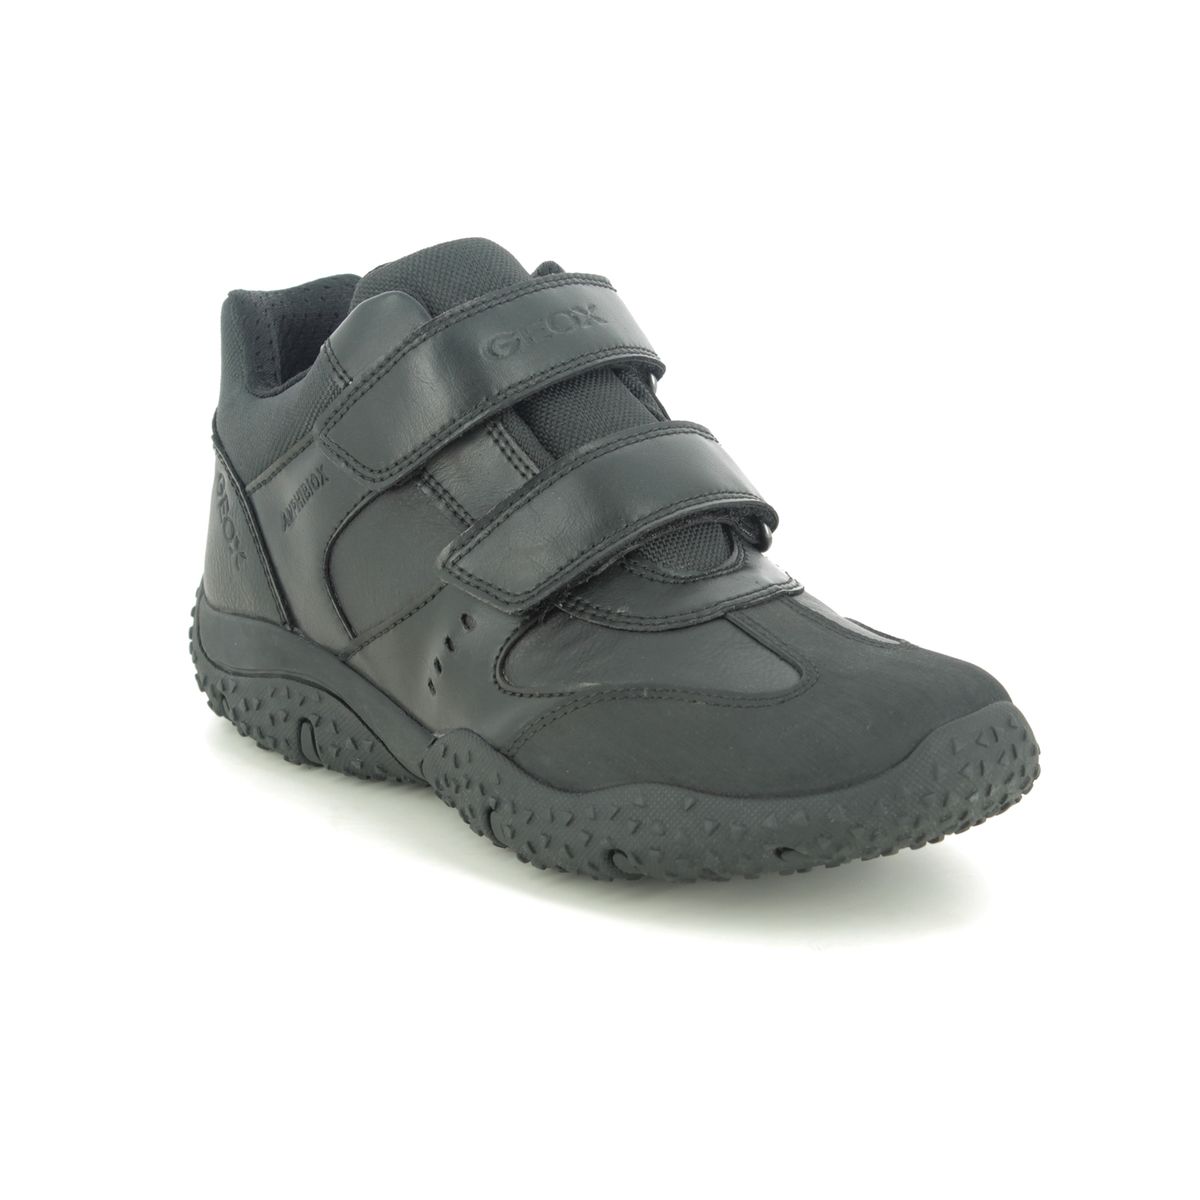 Geox - Baltic Boy Tex (Black Leather) J0442A-C9999 In Size 36 In Plain Black Leather For School For kids